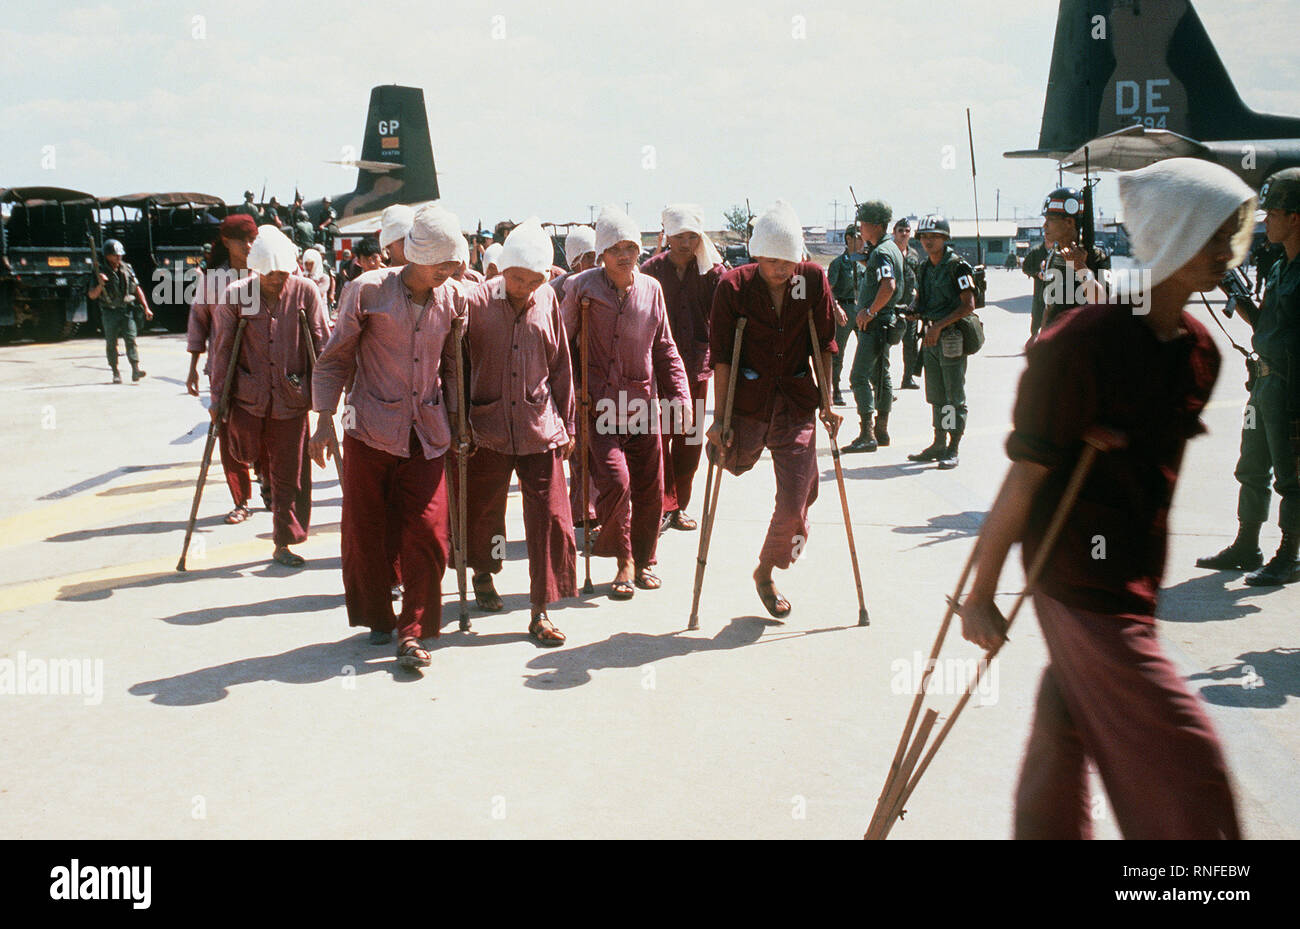 Viet Cong POWs, some on crutches, under the watchful eyes of South Vietnamese military police walk to the waiting C-123 transport aircraft.  The POWS will be airlifted to Loc Ninh, South Vietnam for the prisoner exchange between the United States/South Vietnam and North Vietnam/Viet Cong militaries. Stock Photo